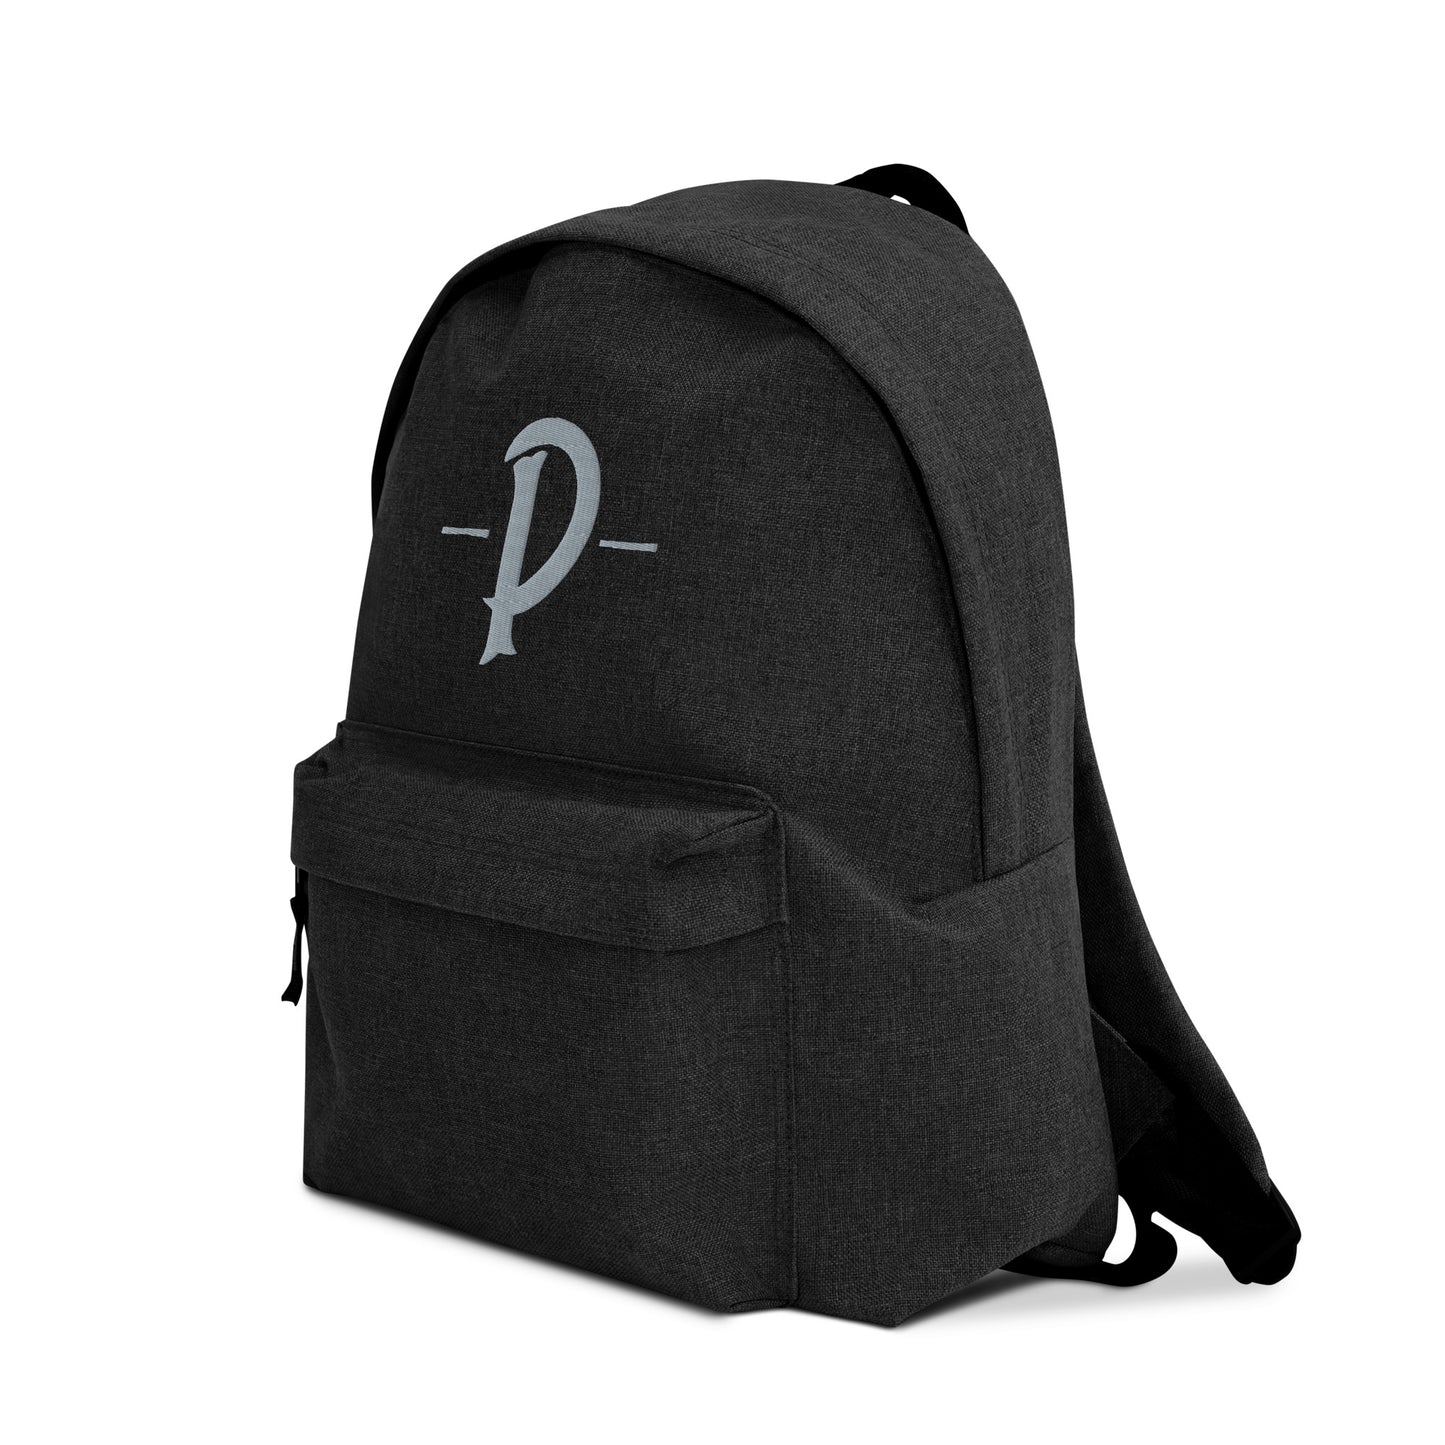 The privateers Embroidered Backpack